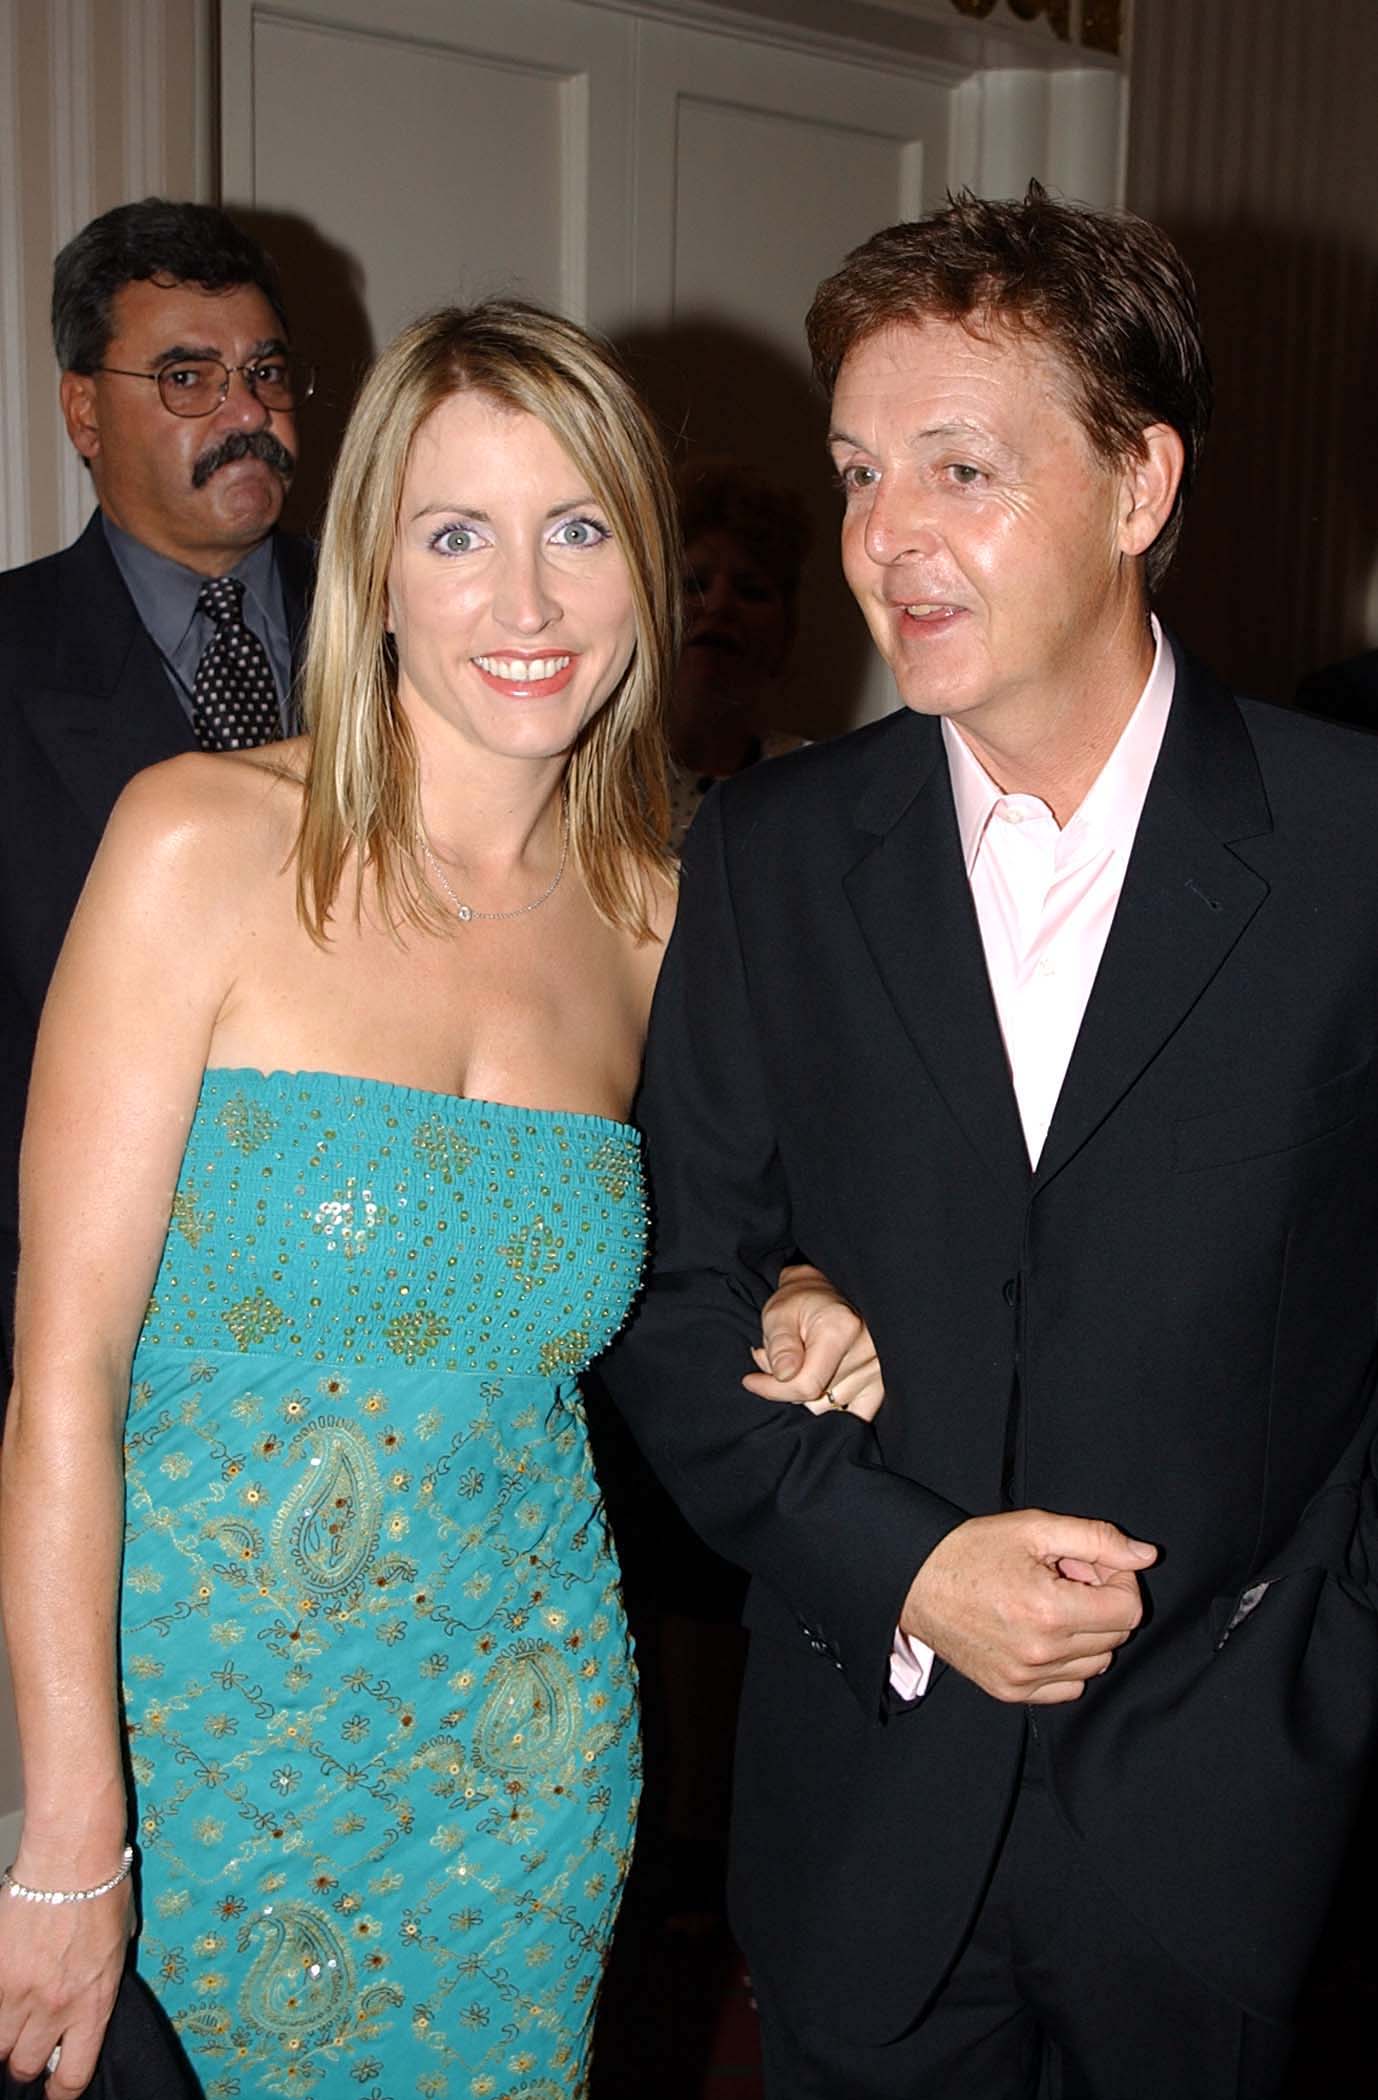 Heather Mills and Paul McCartney during the PETA Event on September 9, 2001 in New York City | Source: Getty Images